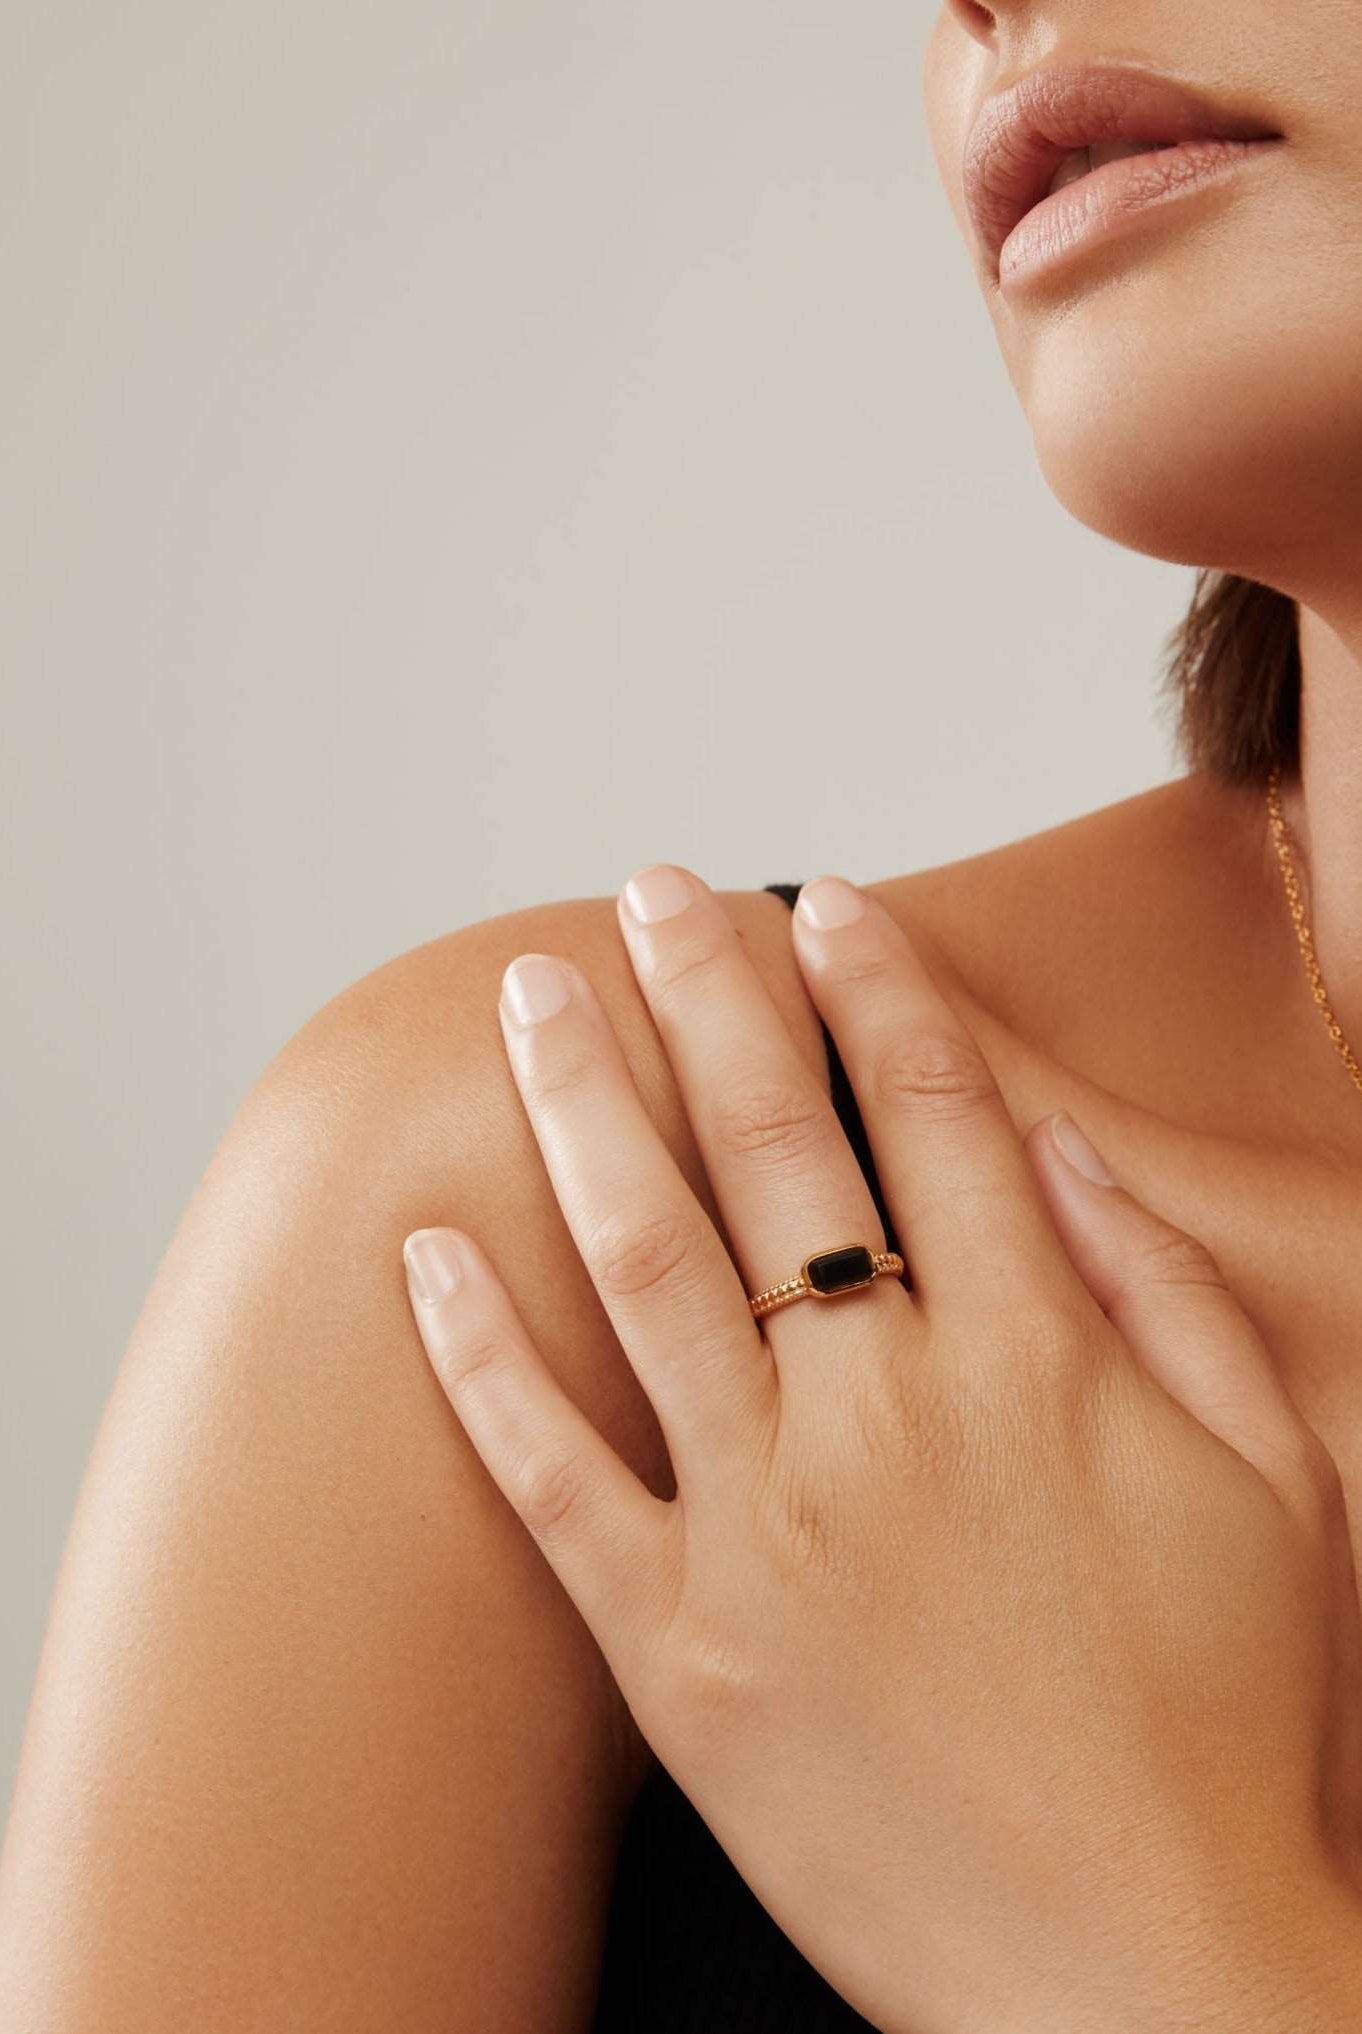 Anna Beck - Black Onyx Small Rectangle Ring